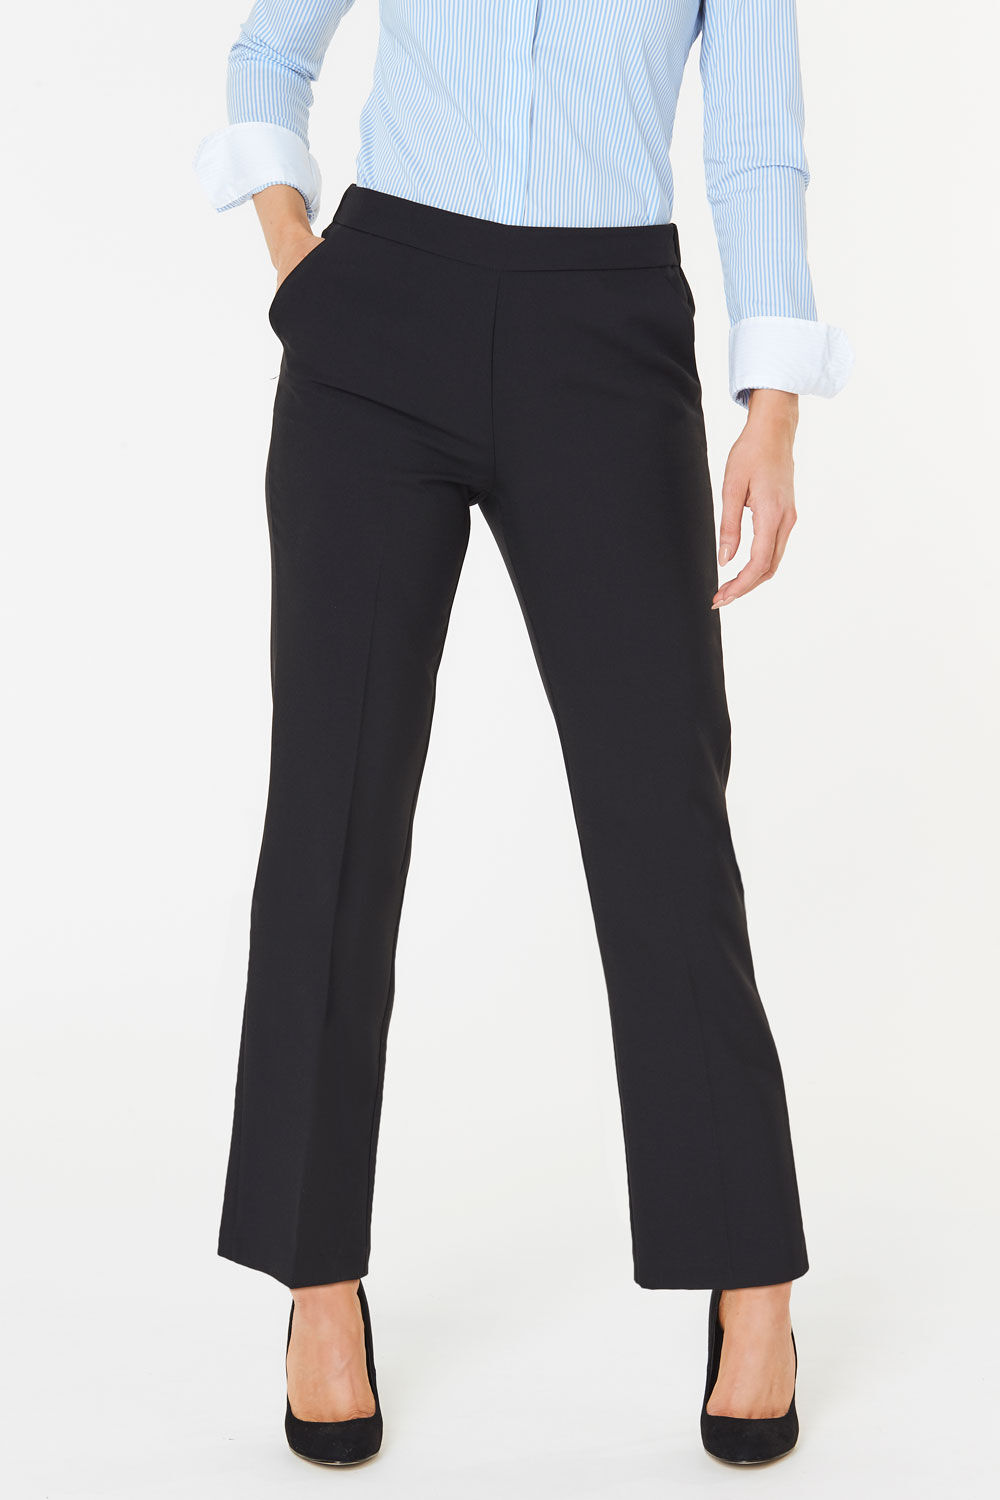 Black Plus Size Pleat Front Tapered Trousers  Curvy Chic Boutique